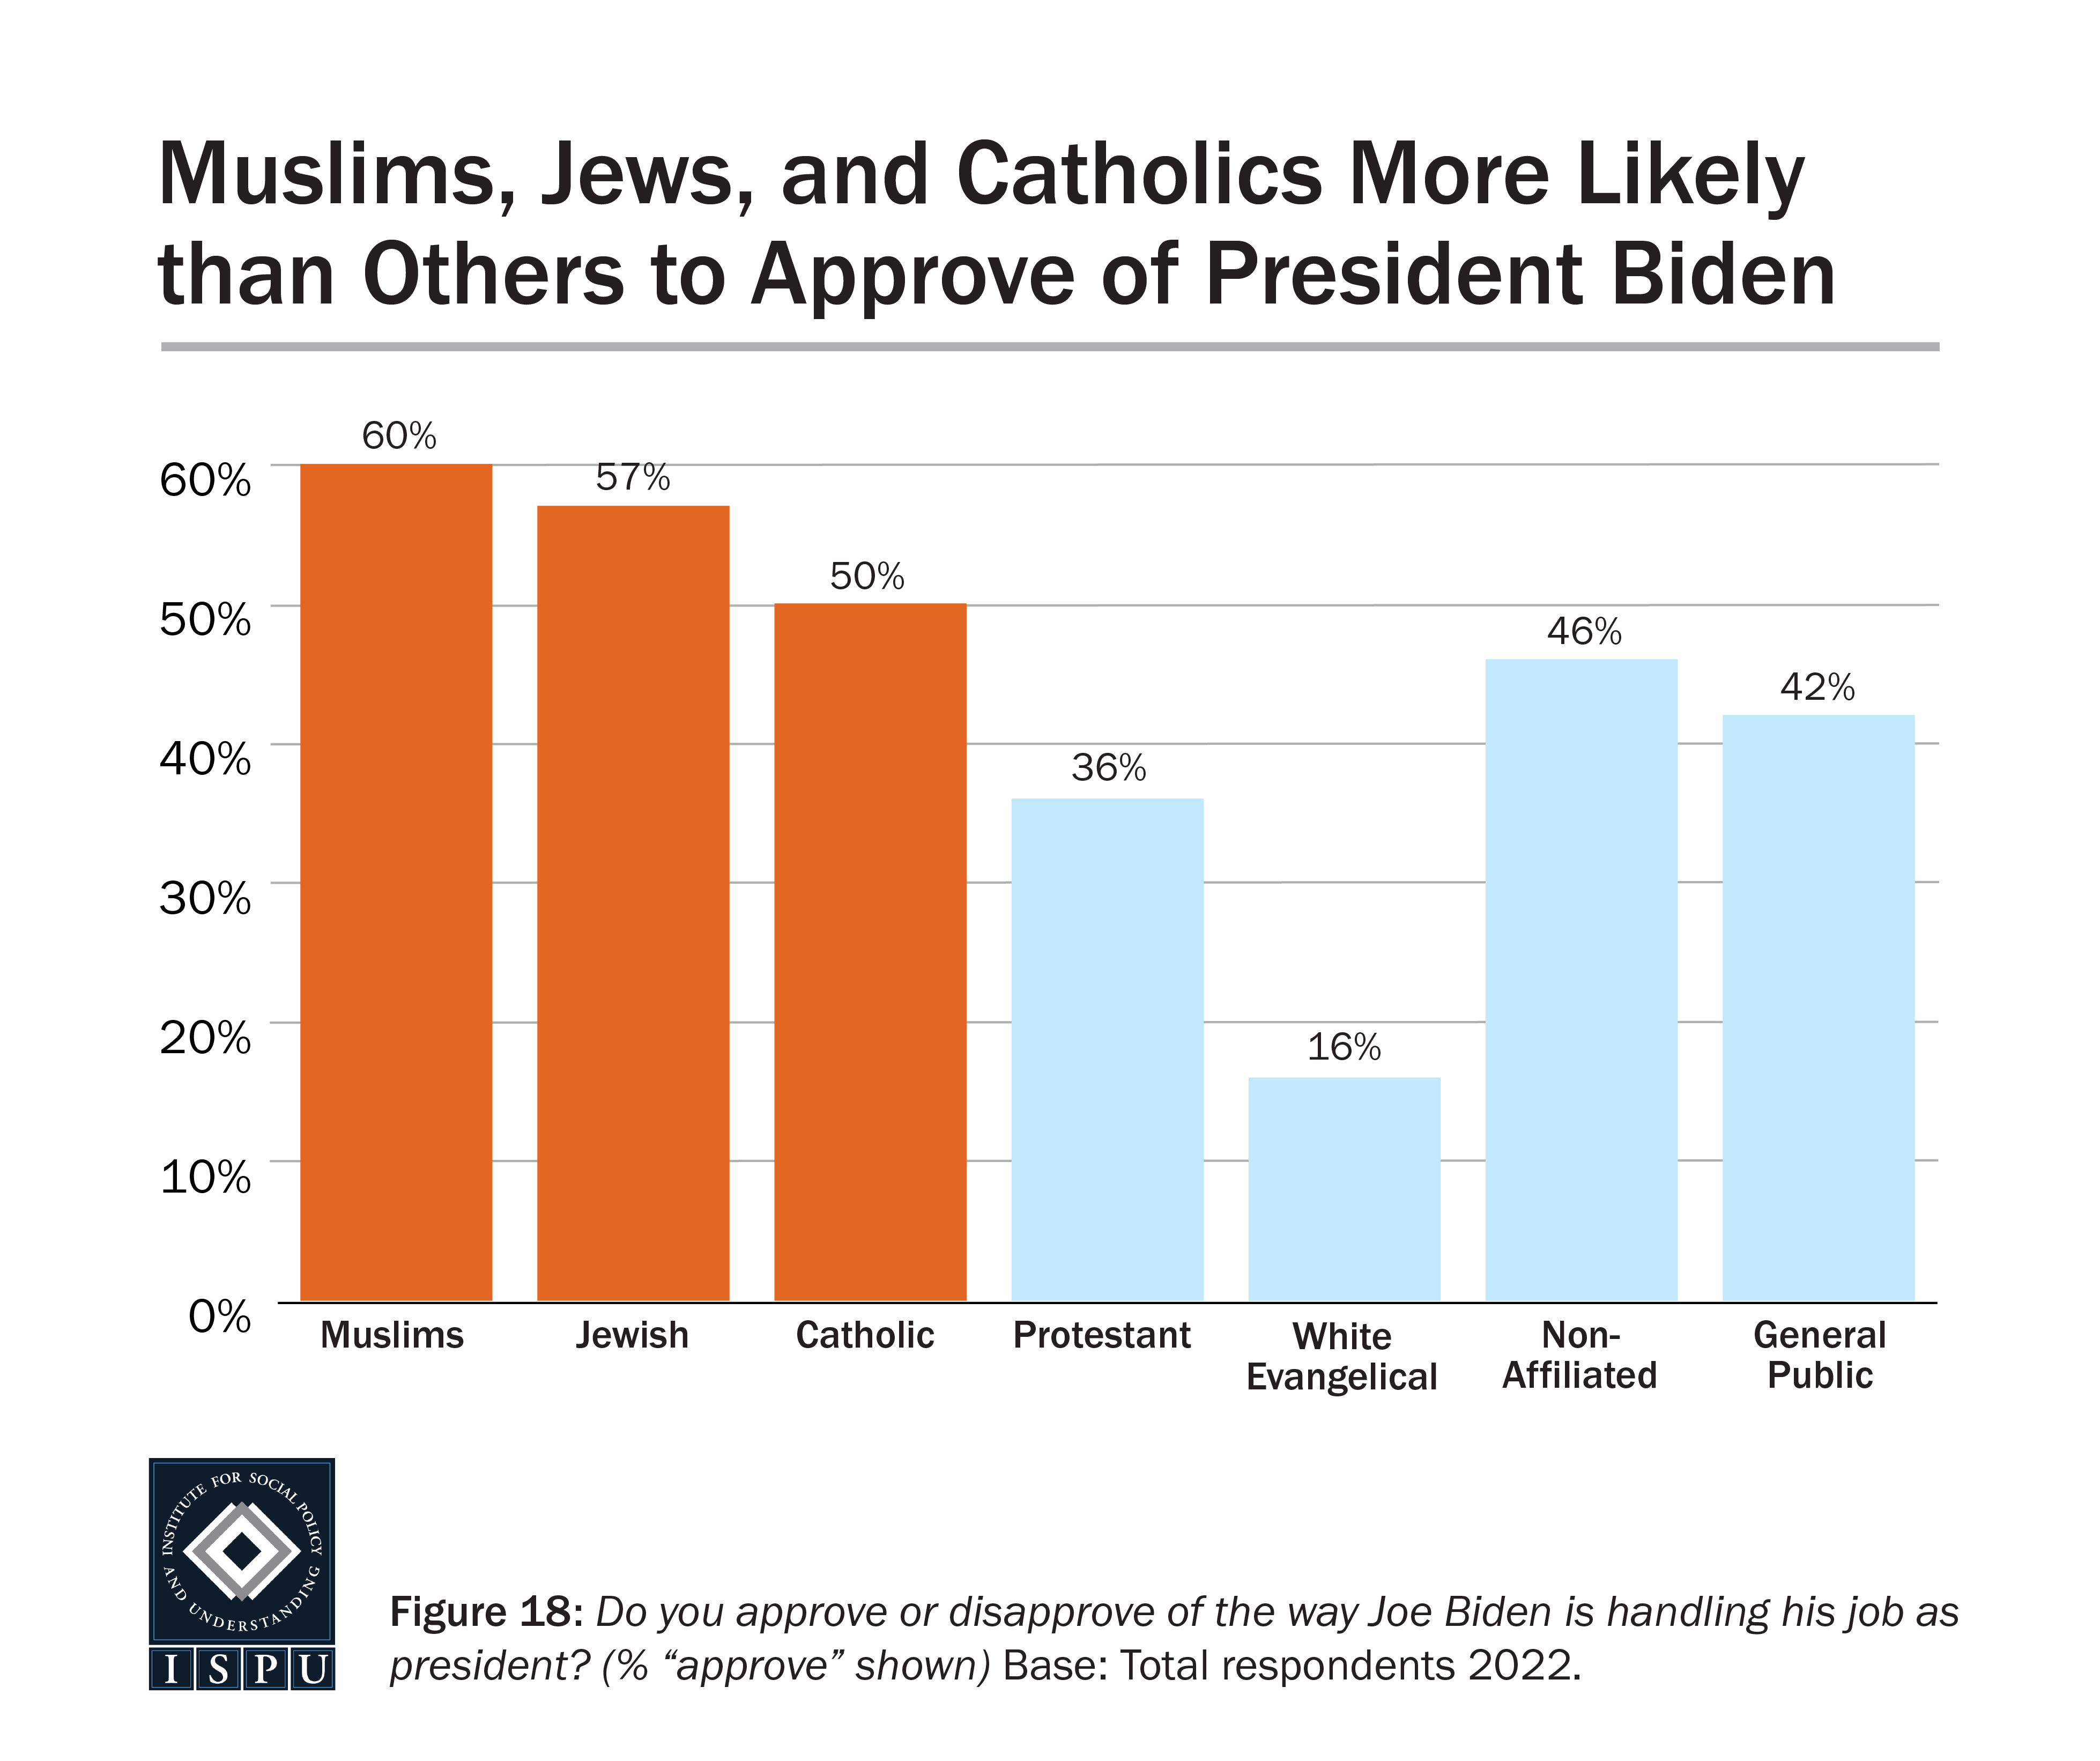 A bar graph showing the proportion of all groups surveyed who approved of President Biden’s job performance.